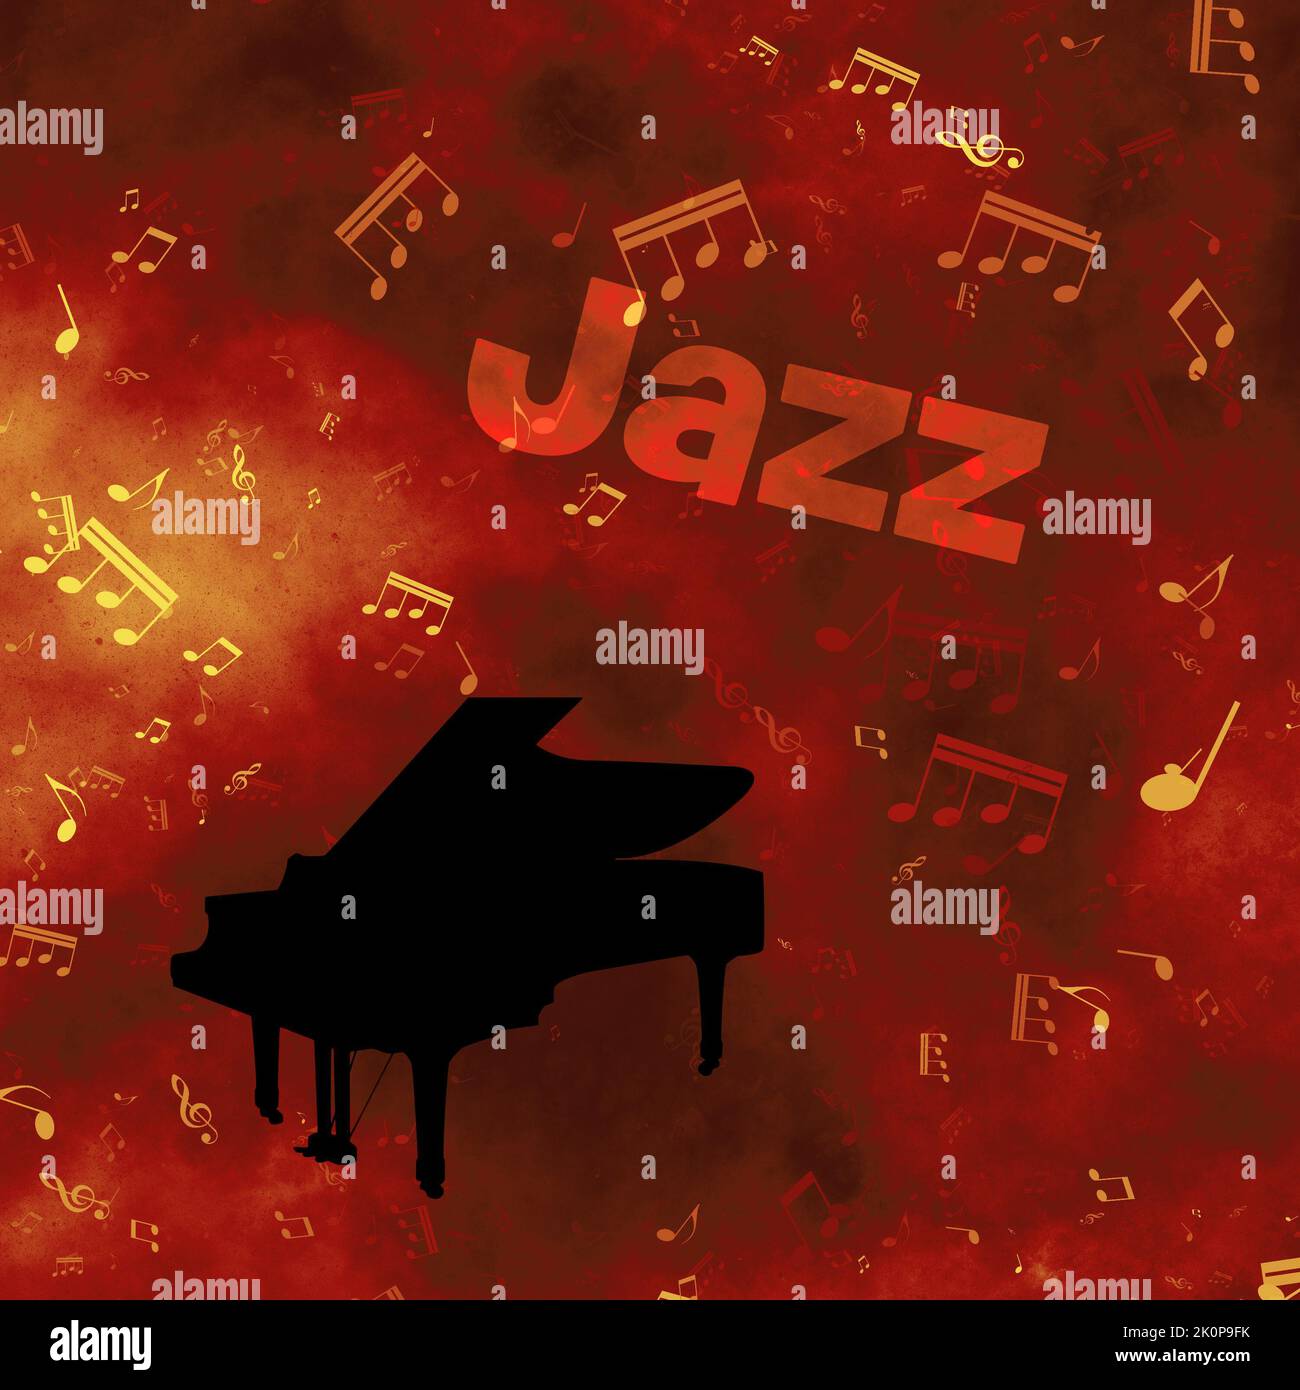 piano instrument and background of music notes for Jazz music concept Stock Photo